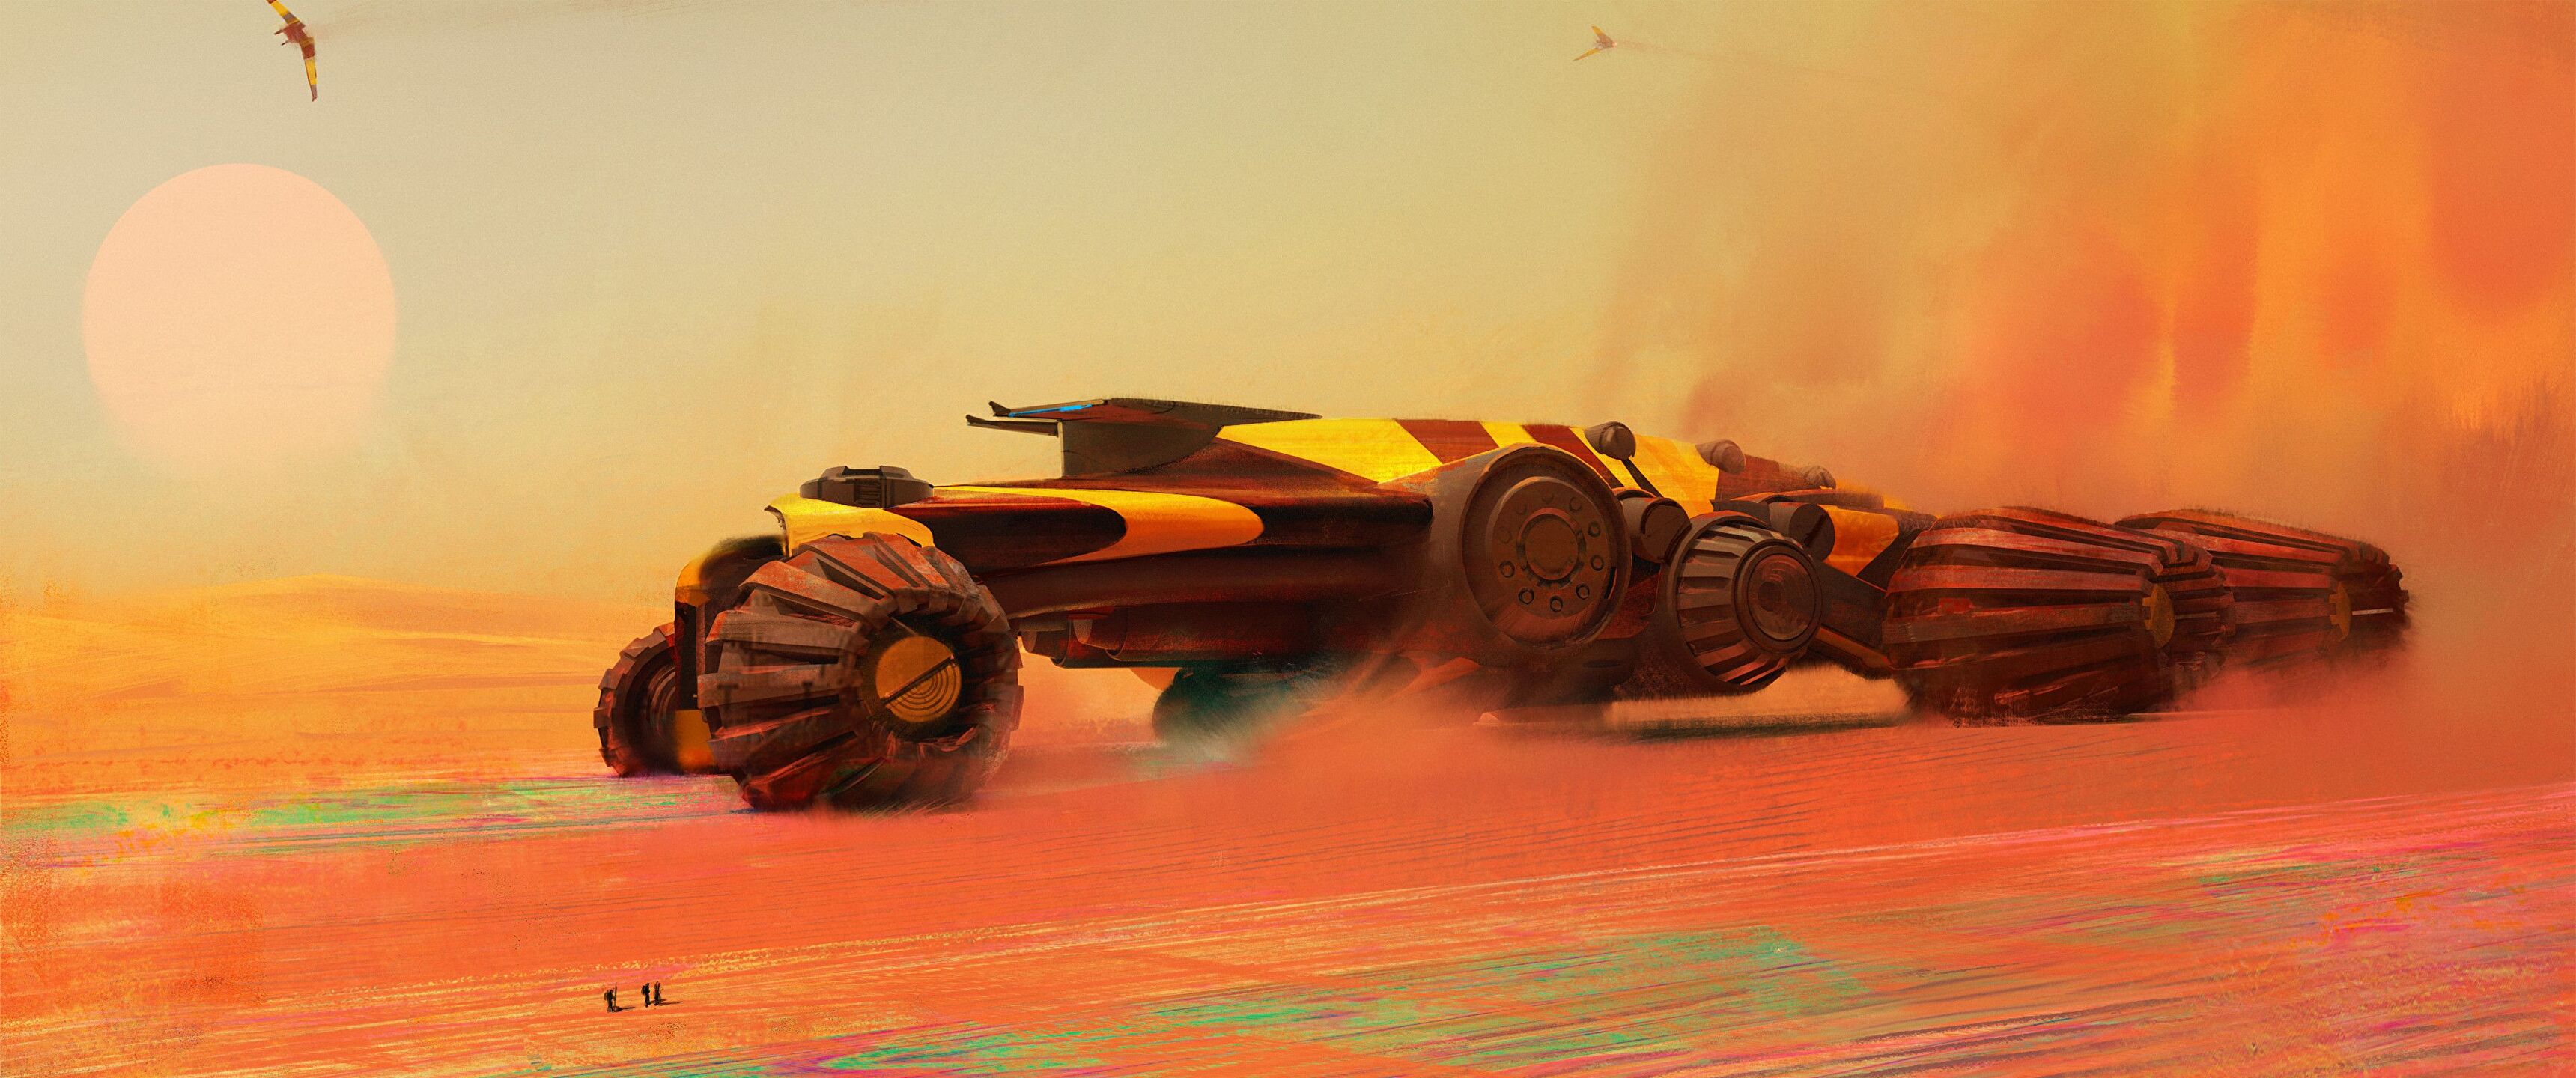 Dune 4K wallpaper for your desktop or mobile screen free and easy to download